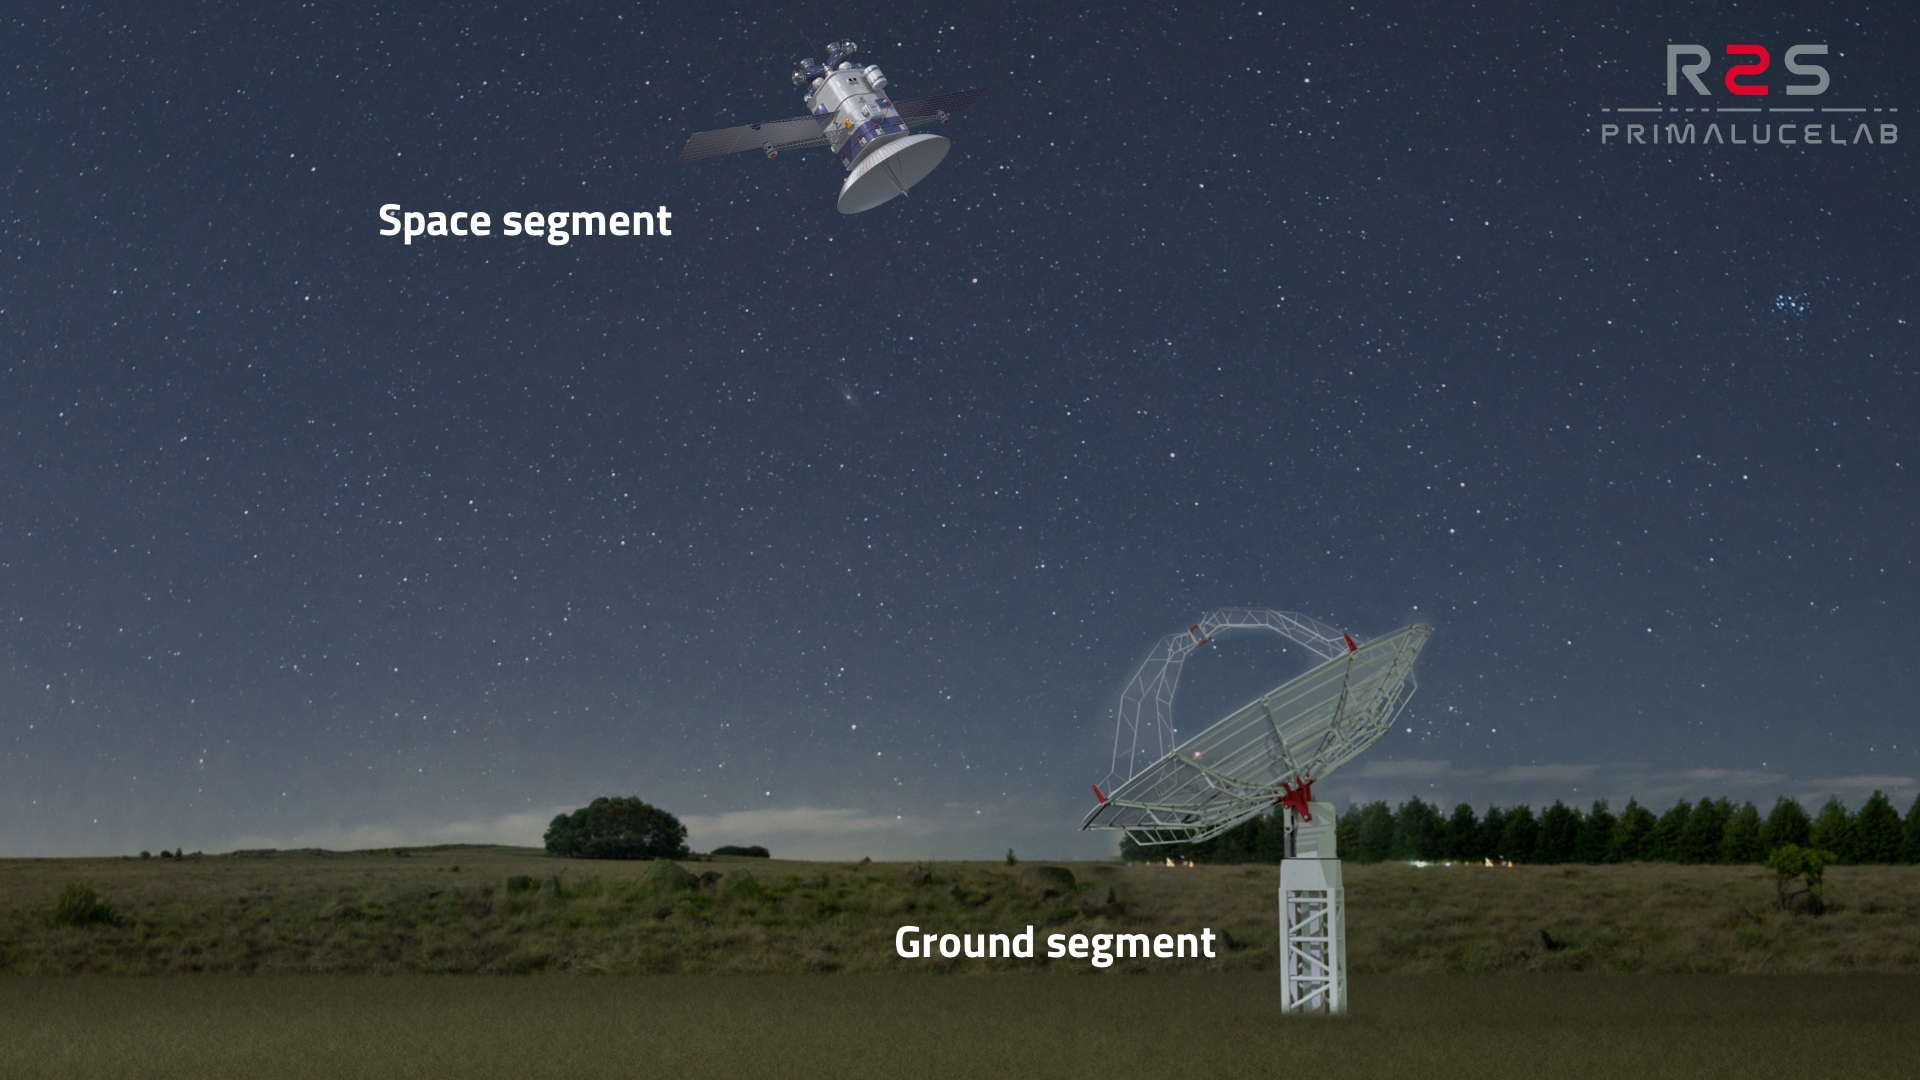 What is space communication: a space communication system requires the use of at least one ground station on Earth (the ground segment) and at least one spacecraft (the space segment). Image not in scale.